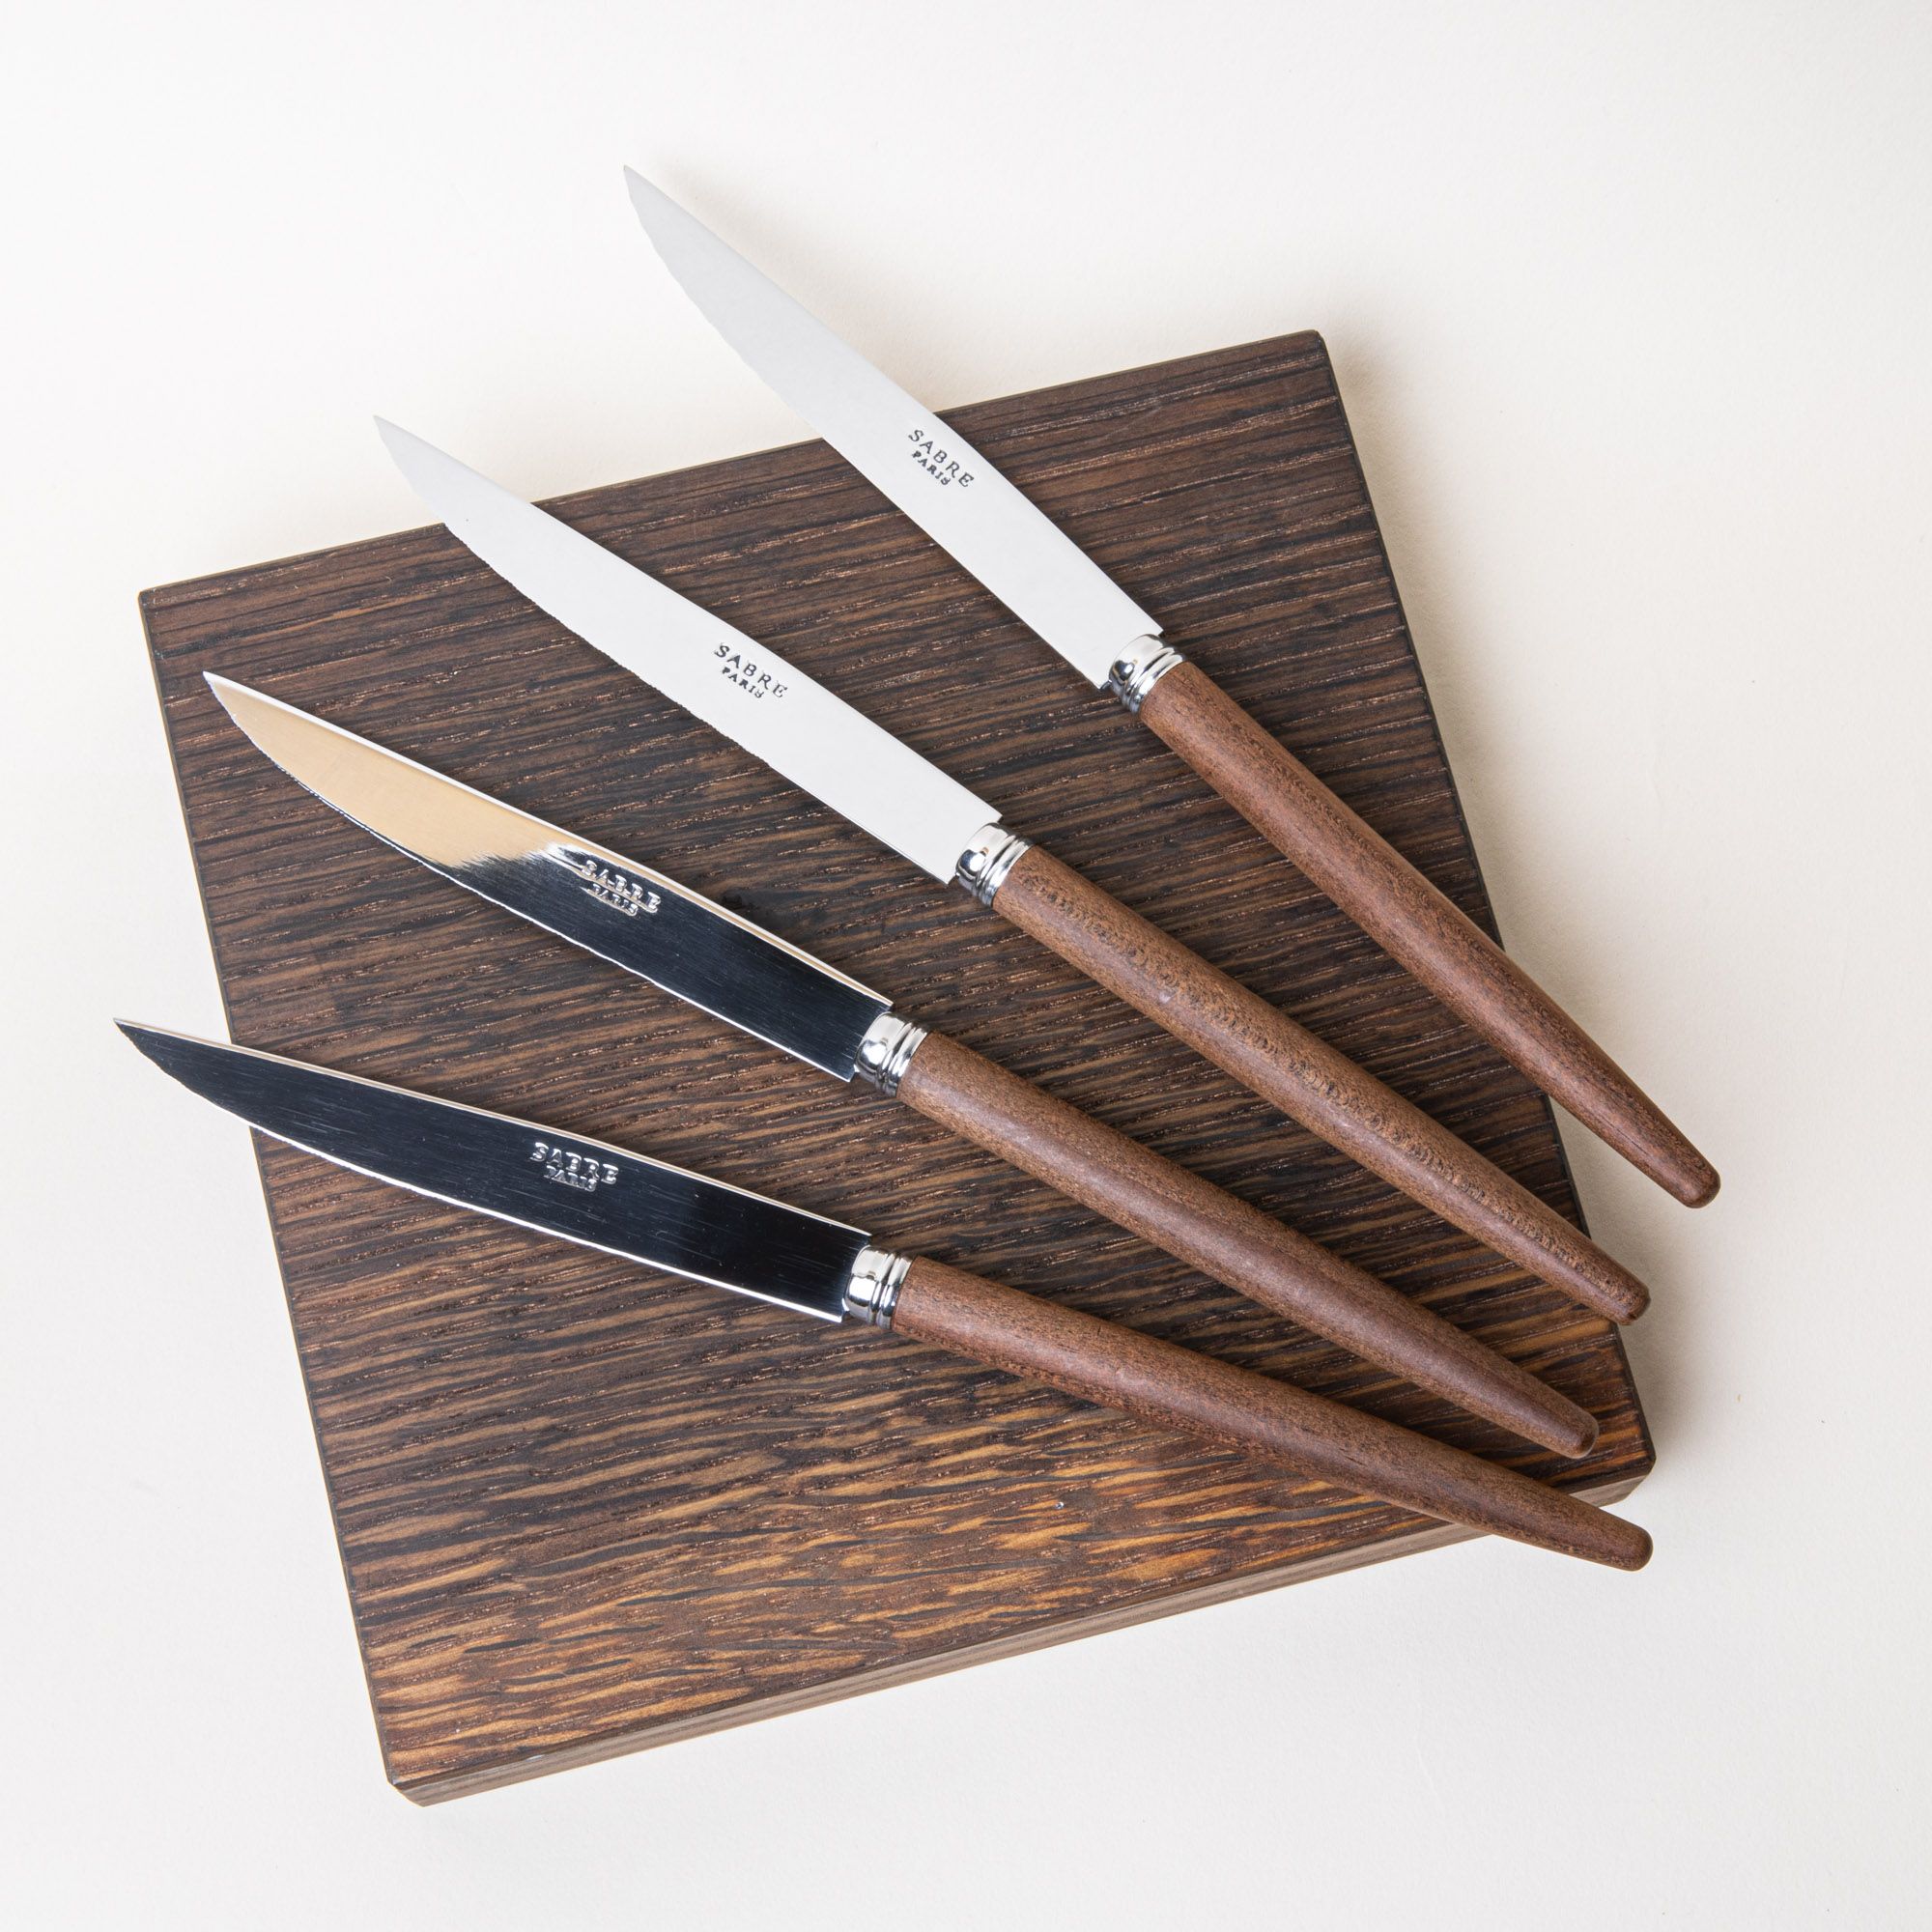 Four steak knives with steel blades and simple wood handles, fanned over a dark wood cutting board